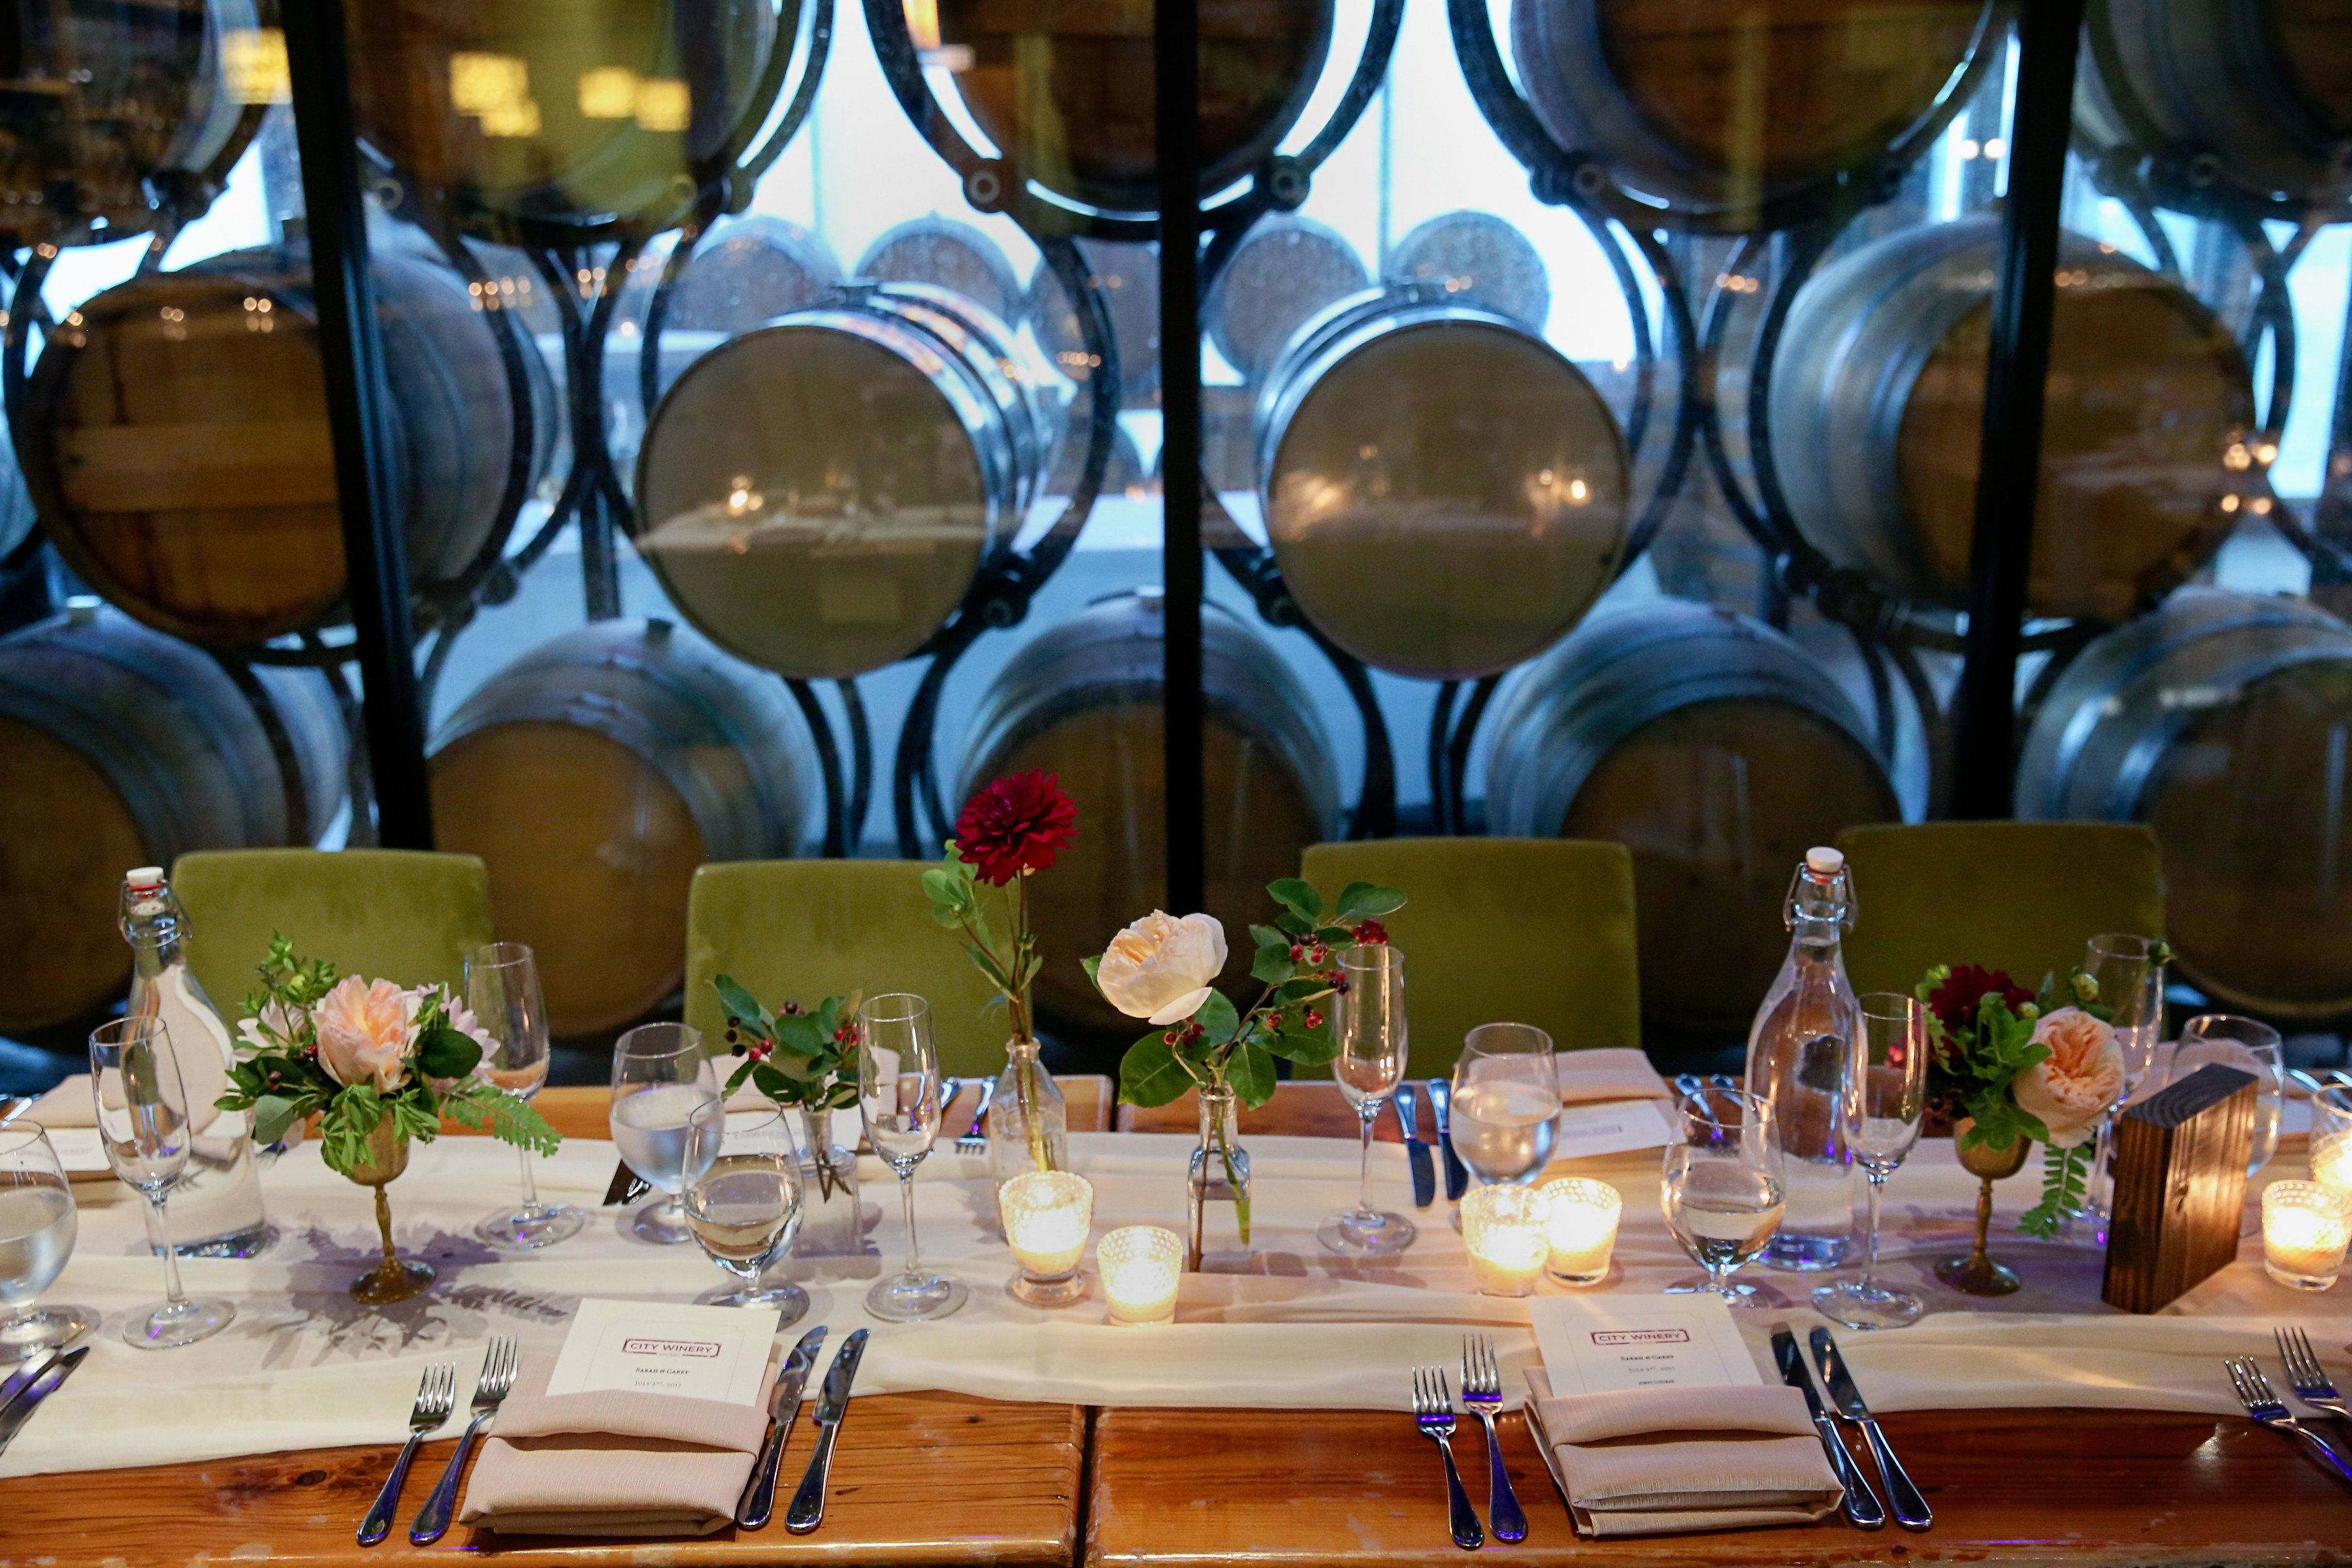 Simple low table arrangements in glass bottles and vintage brass with garden roses and dahlias at winery.